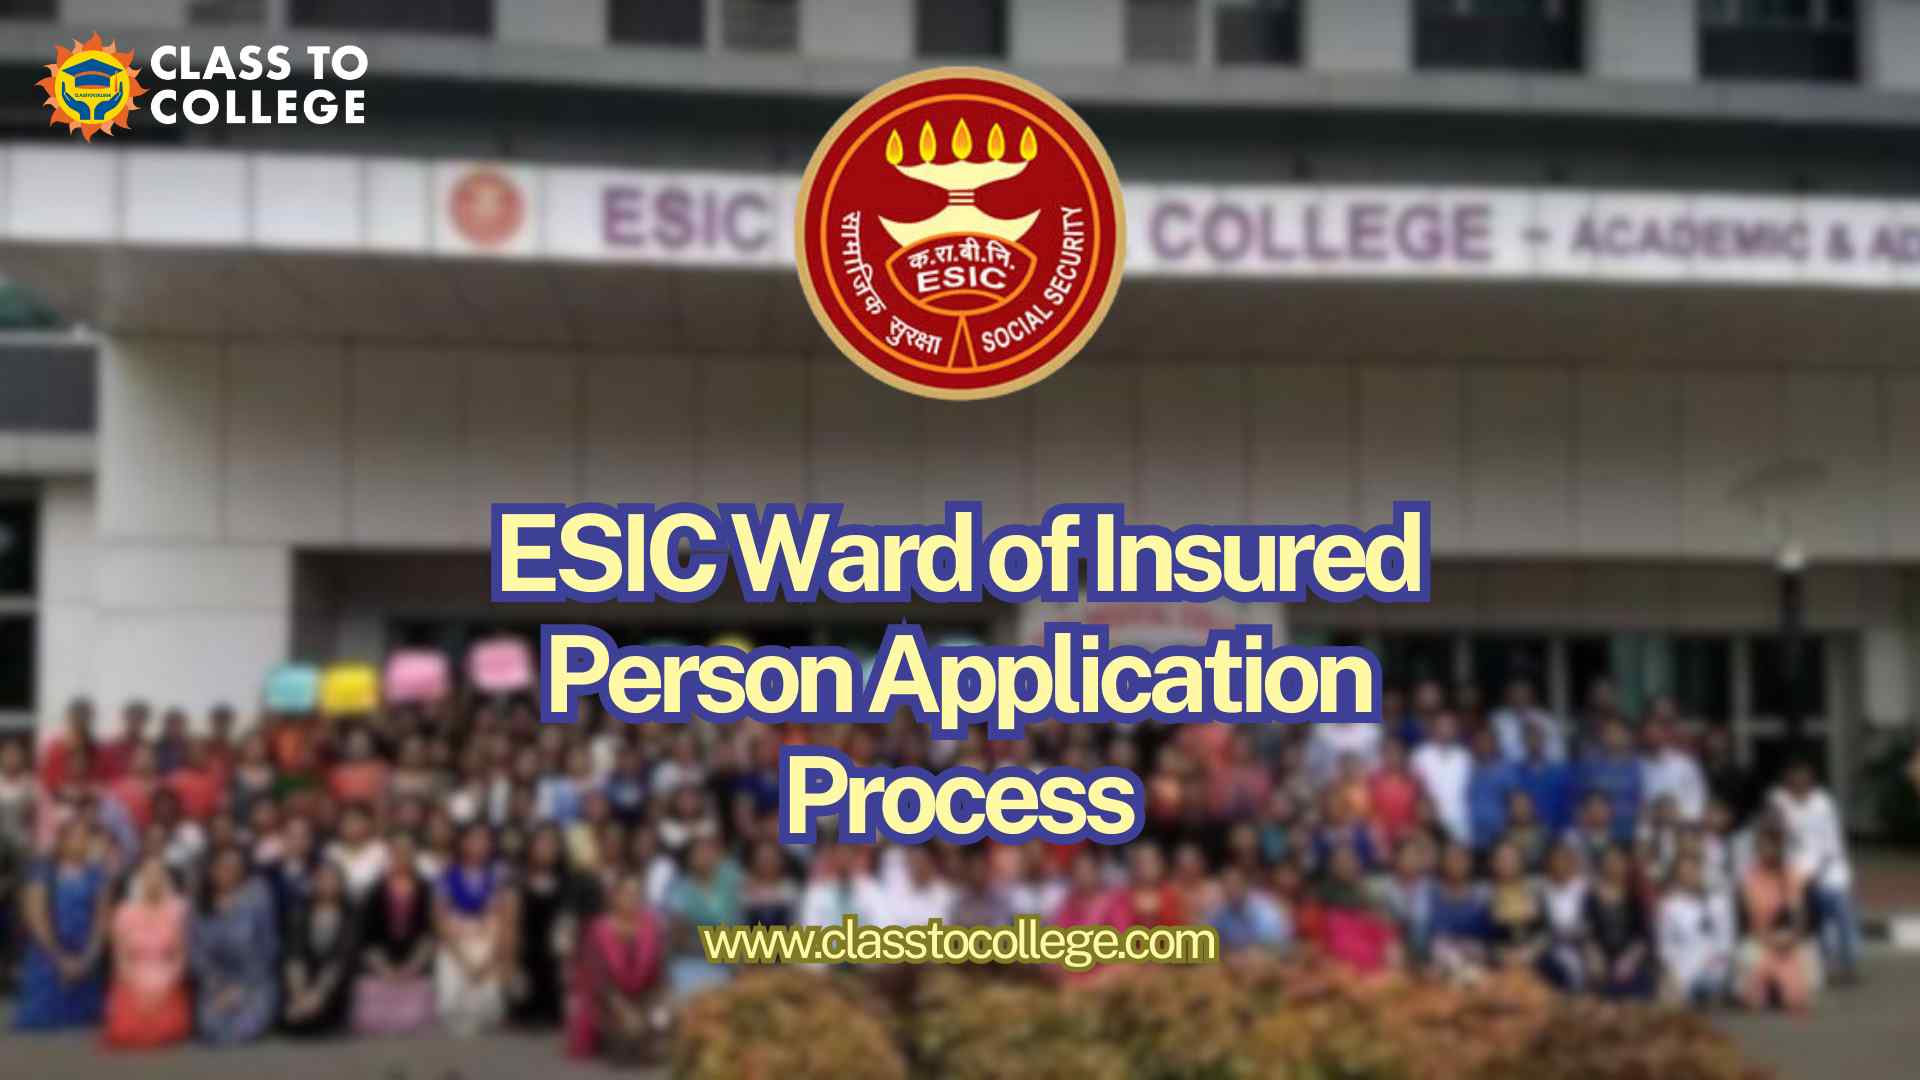 ESIC Ward of Insured Person Application Process